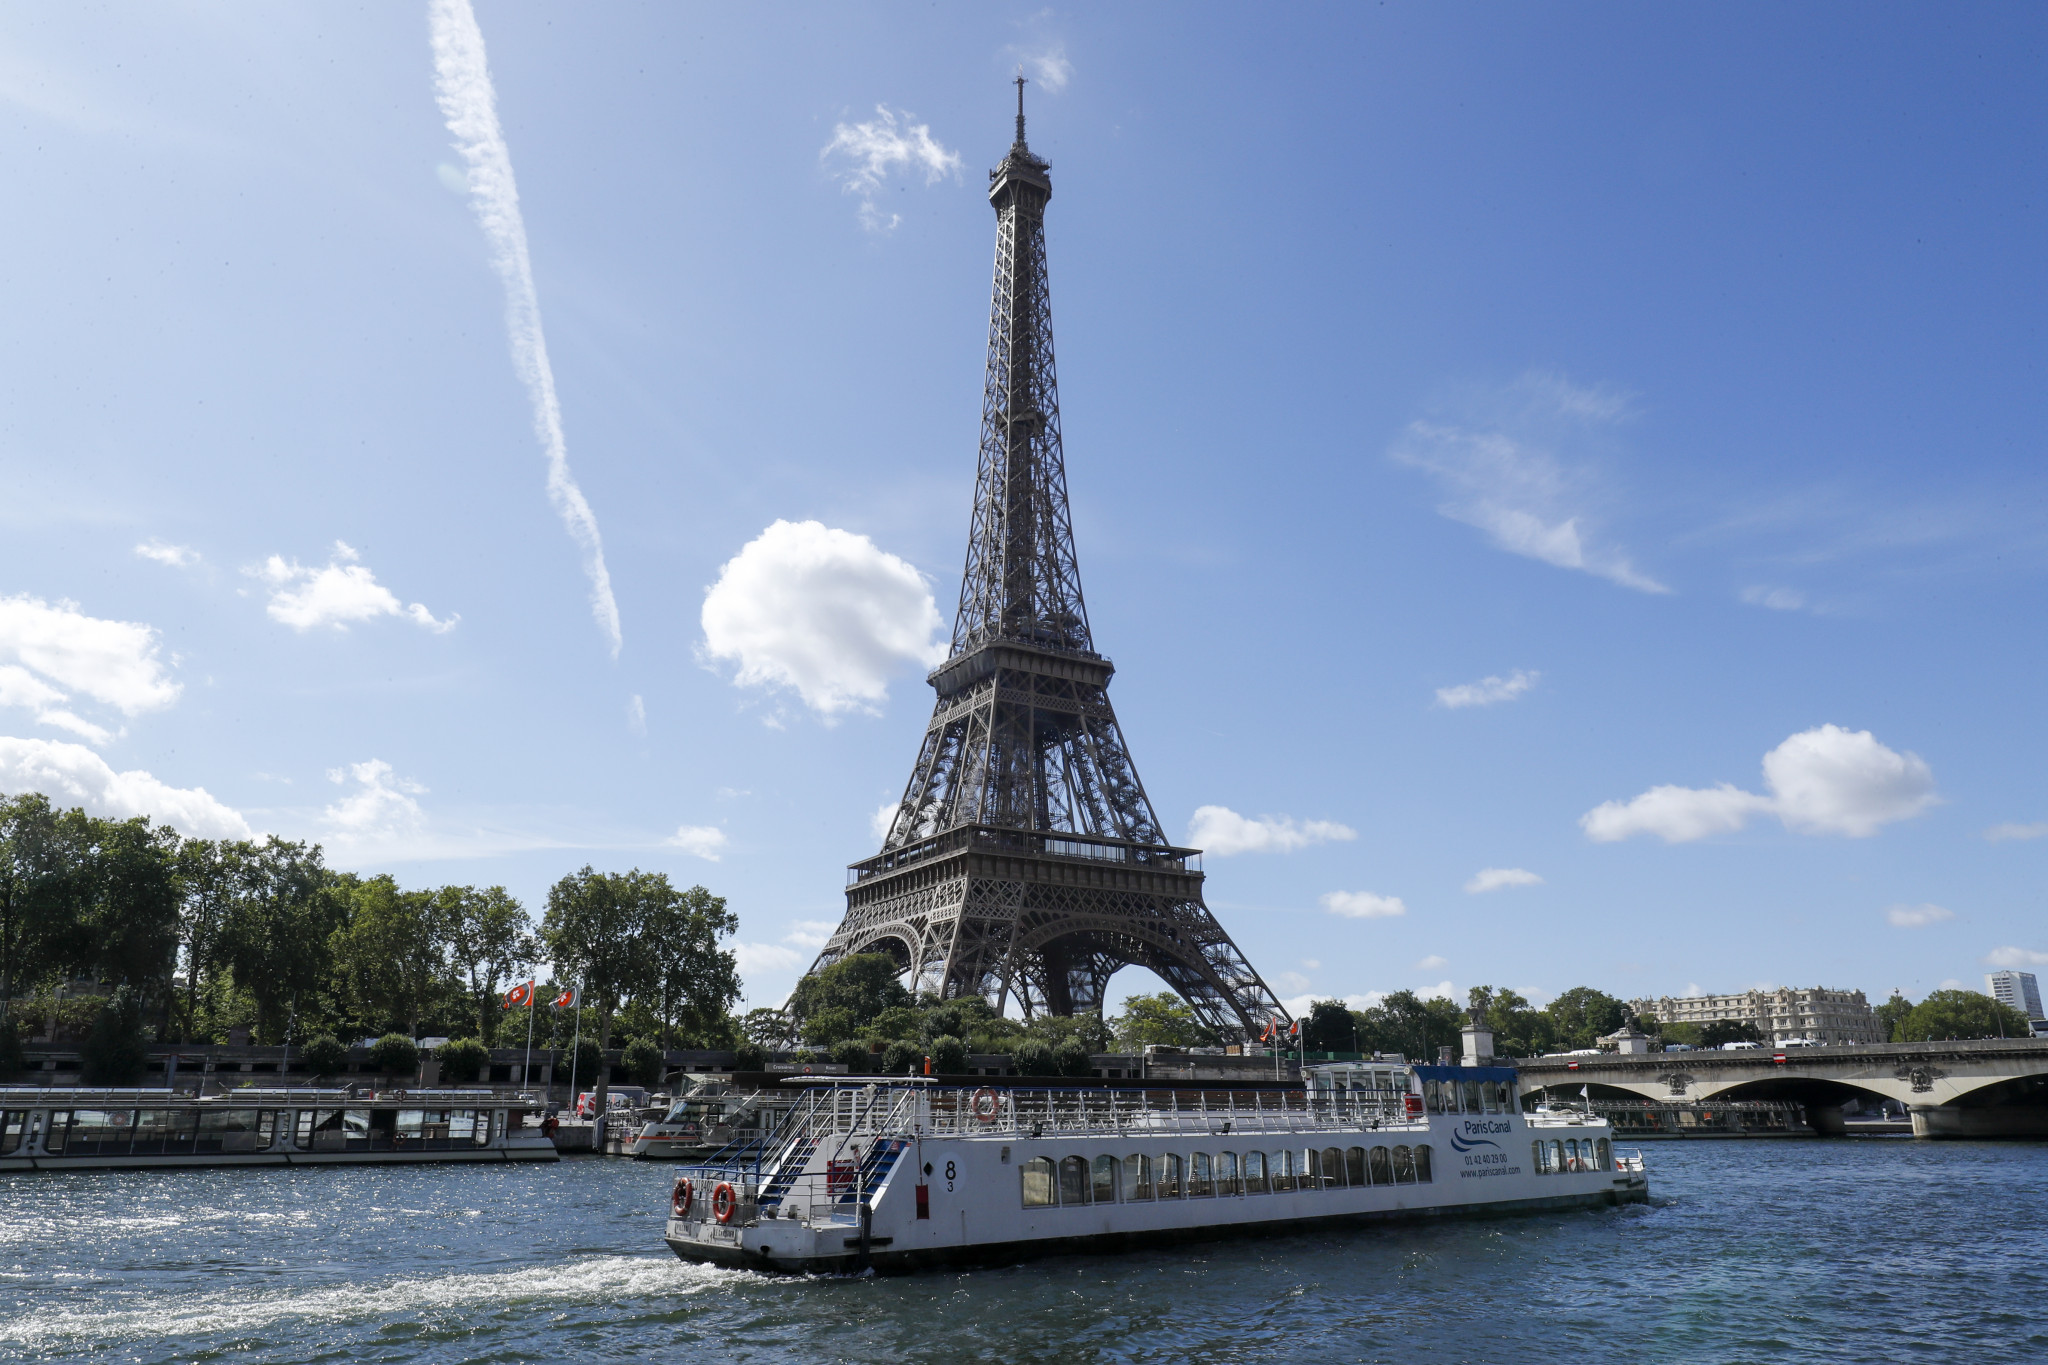 A fleet of 39 boats sailed the six-kilometre route from Austerlitz Bridge to the foot of the Eiffel Tower ©Getty Images